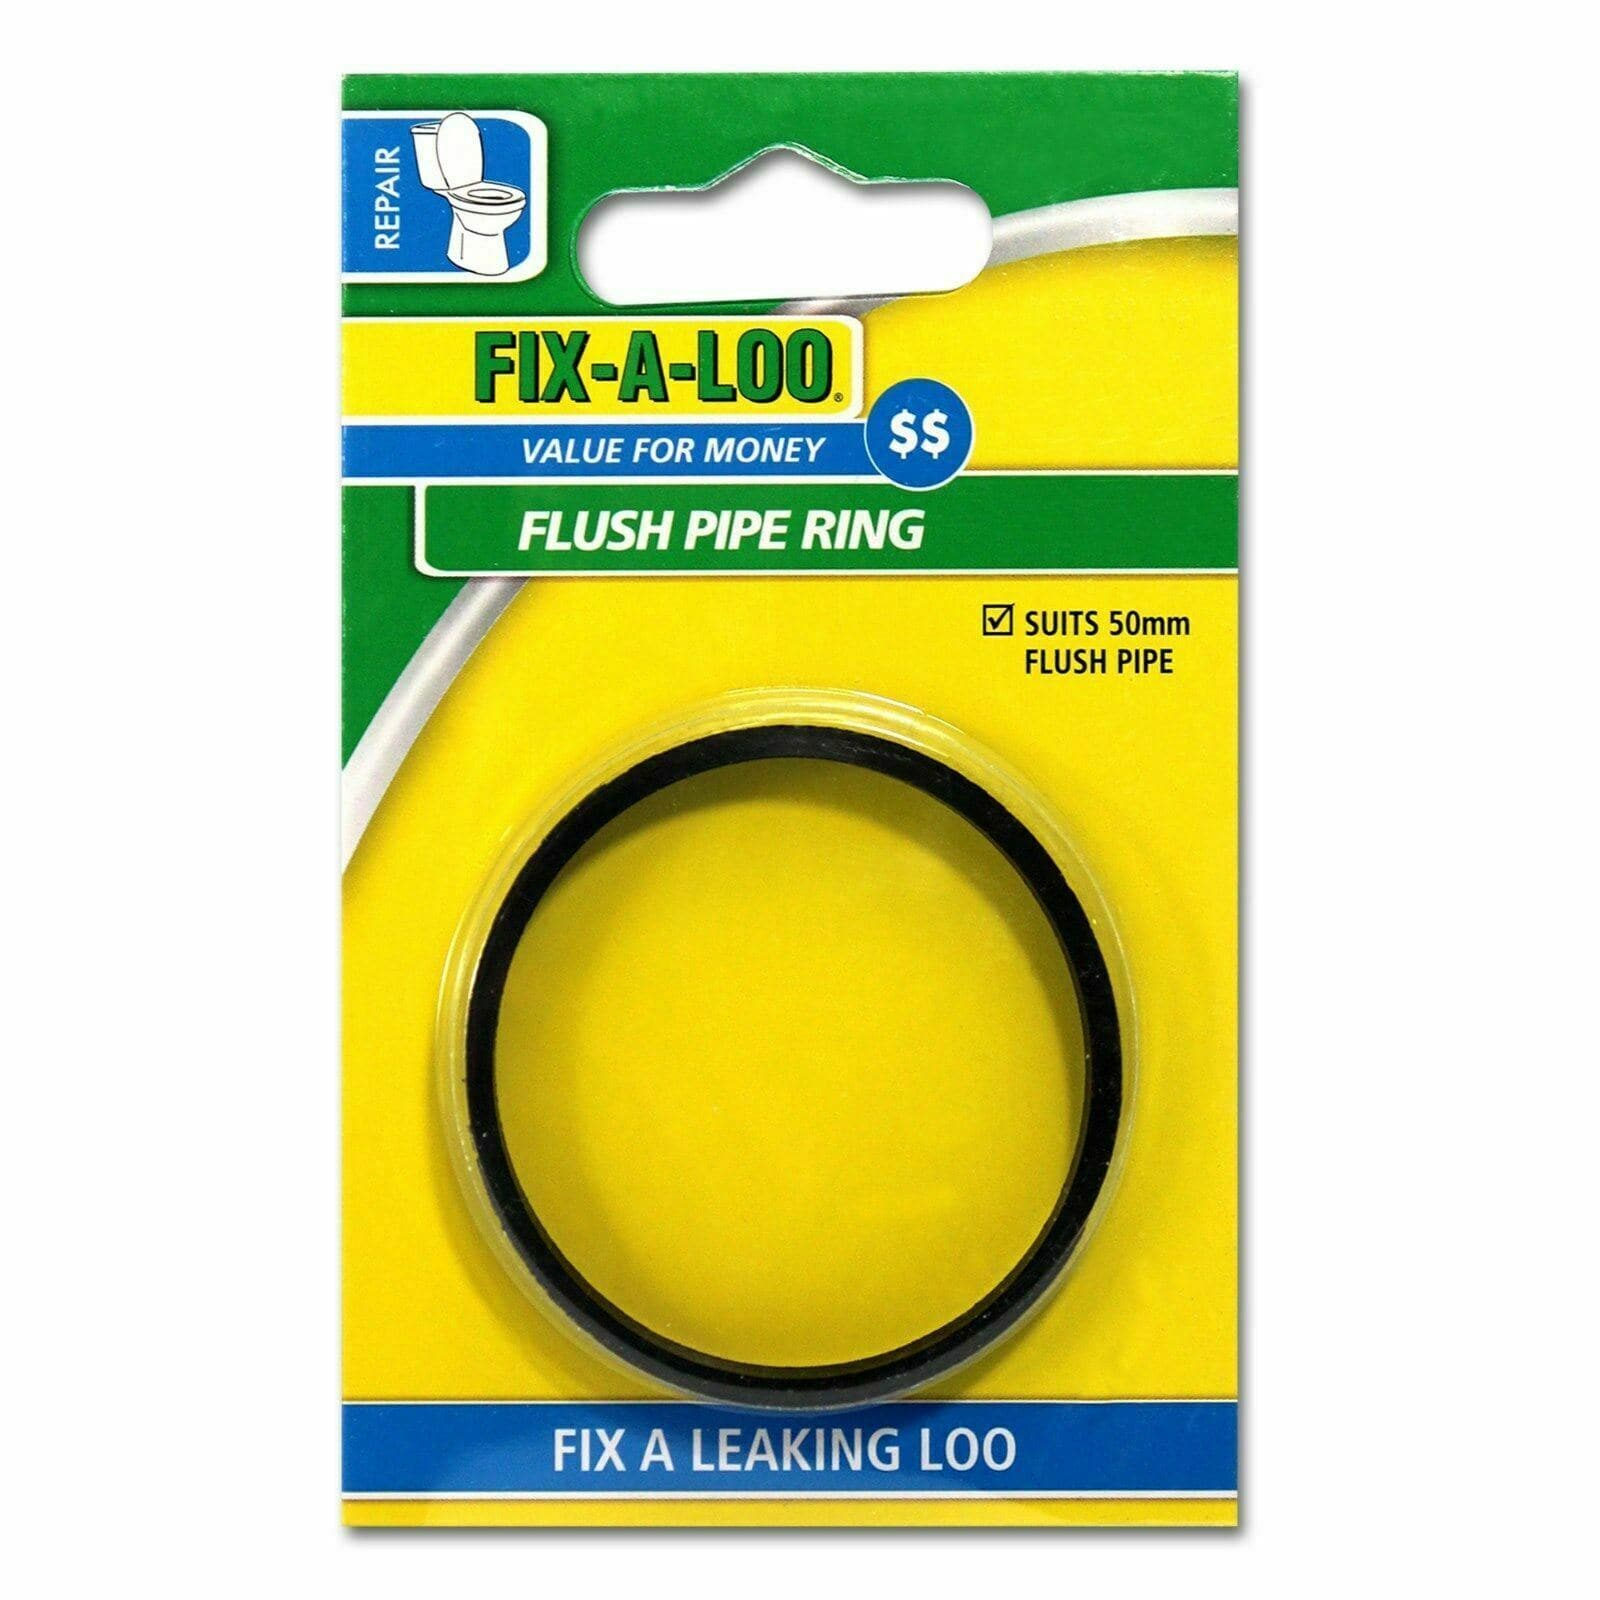 FIX-A-LOO Flush Pipe Ring Suits 50mm Flush Pipe 208484 - Double Bay Hardware